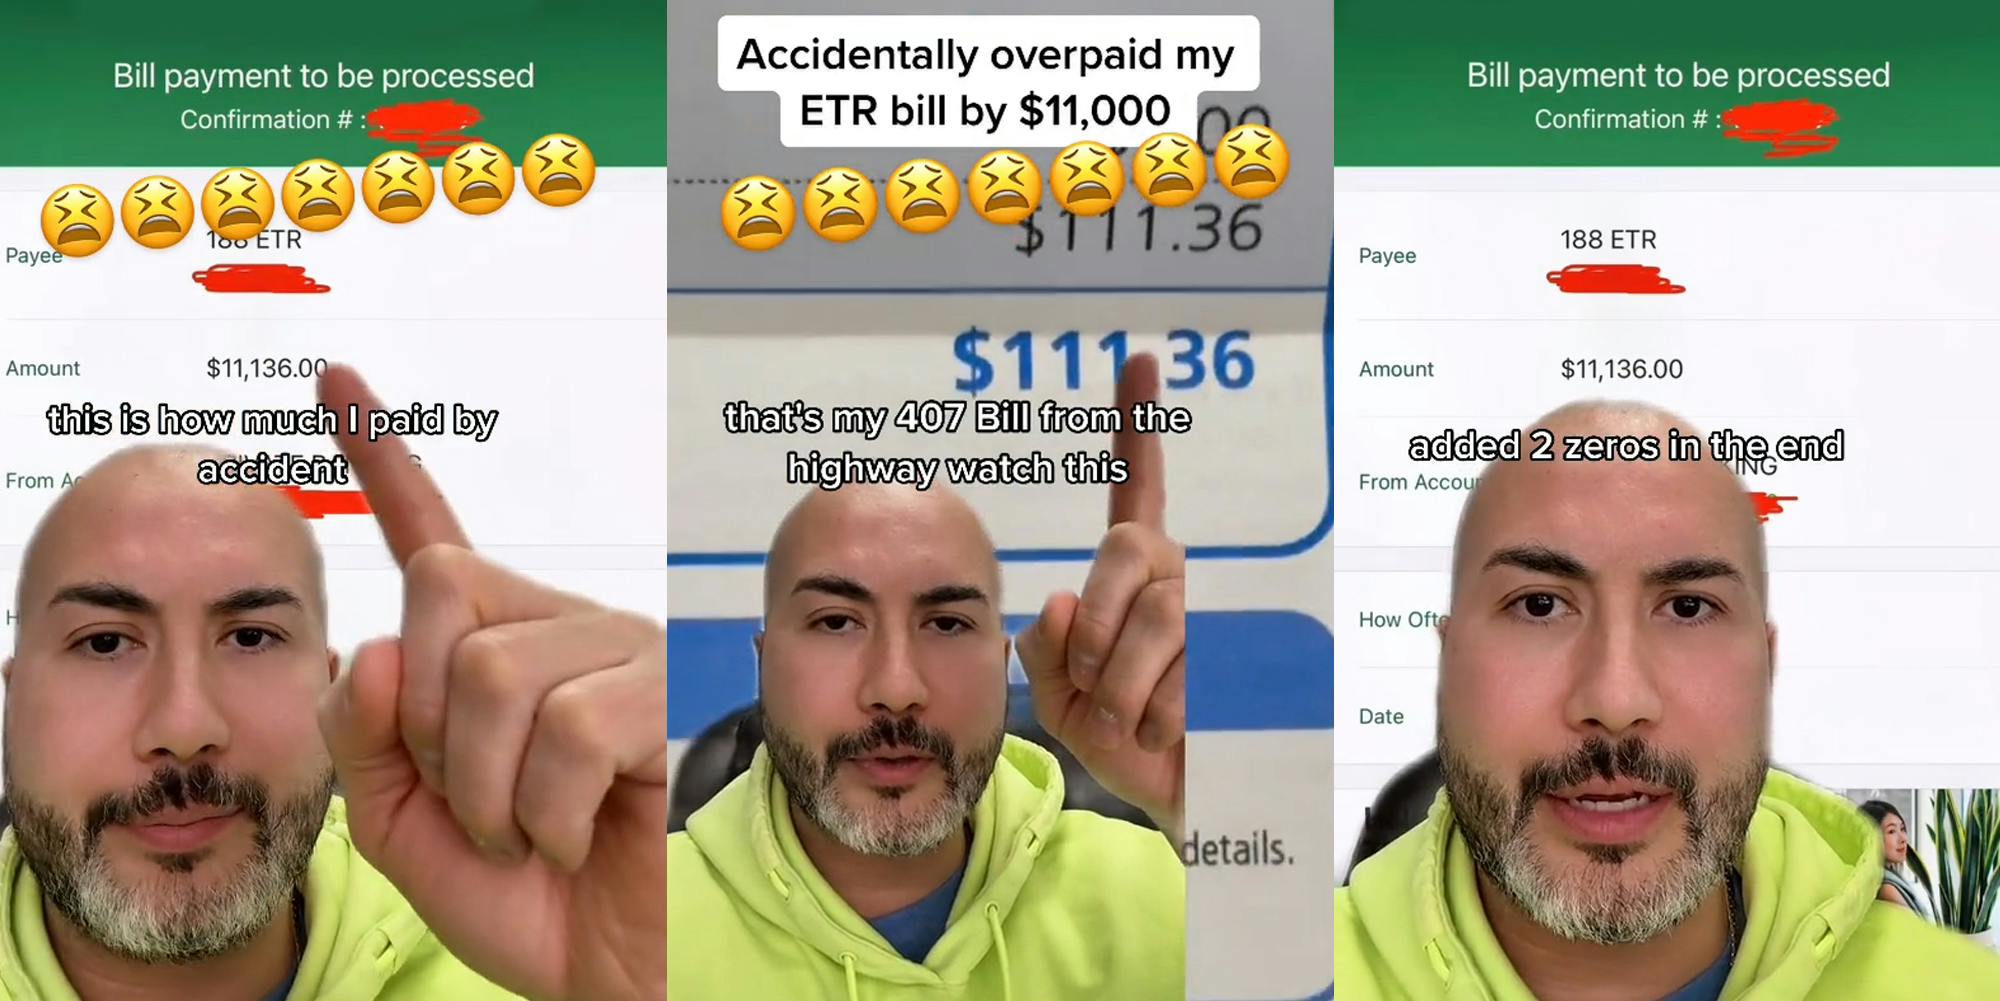 man greenscreen TikTok over bill payment processed at $11,136.00 with caption "this is how much I paid by accident" (l) man greenscreen TikTok over bill with captions "Accidentally overpaid my ETR bill by $11,000 that's my 407 bill from the highway watch this" (c) man greenscreen TikTok over bill payment processed at $11,136.00 with caption "added 2 zeros in the end" (r)